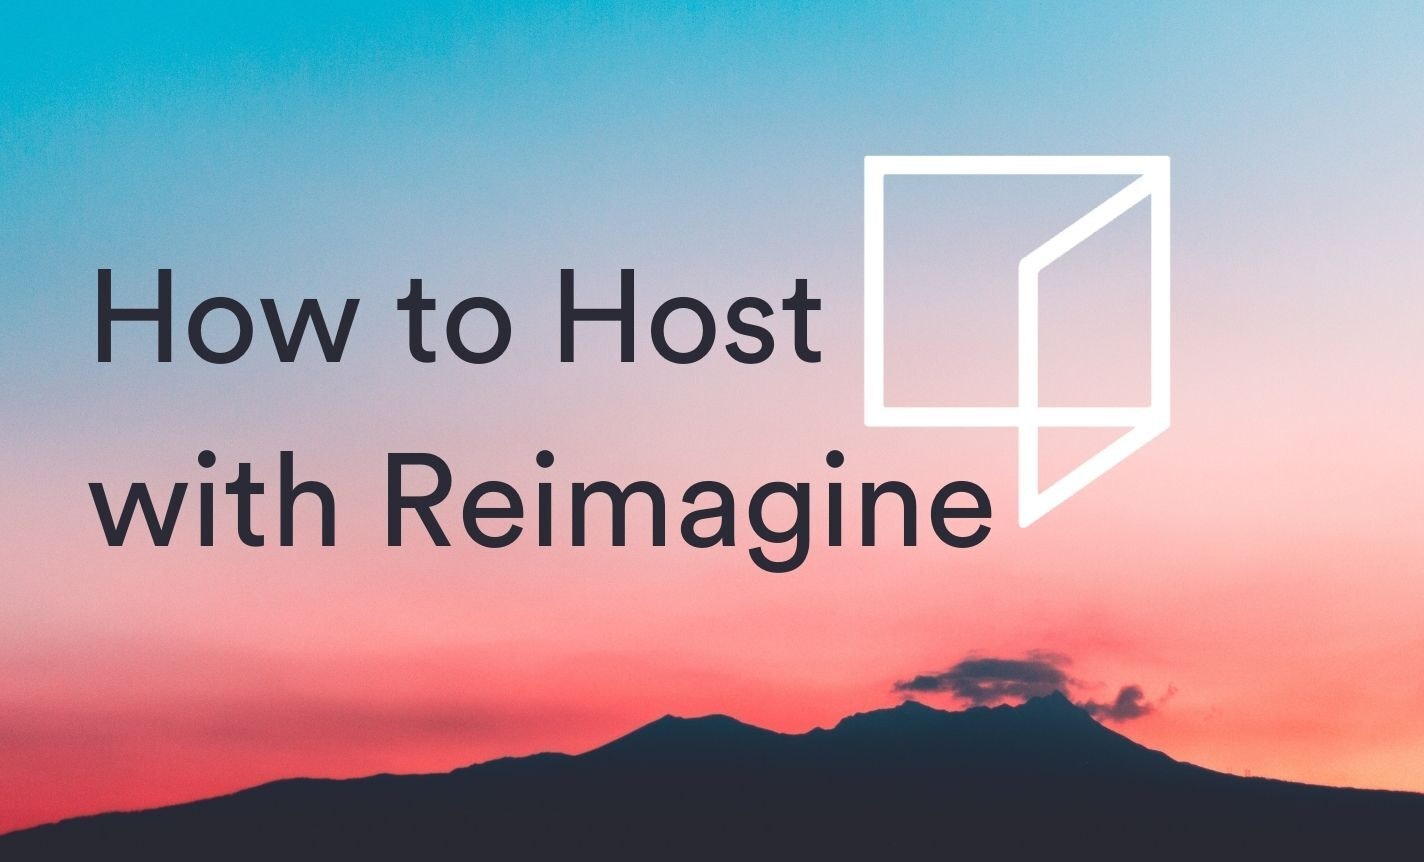 How to a Host a Reimagine Experience